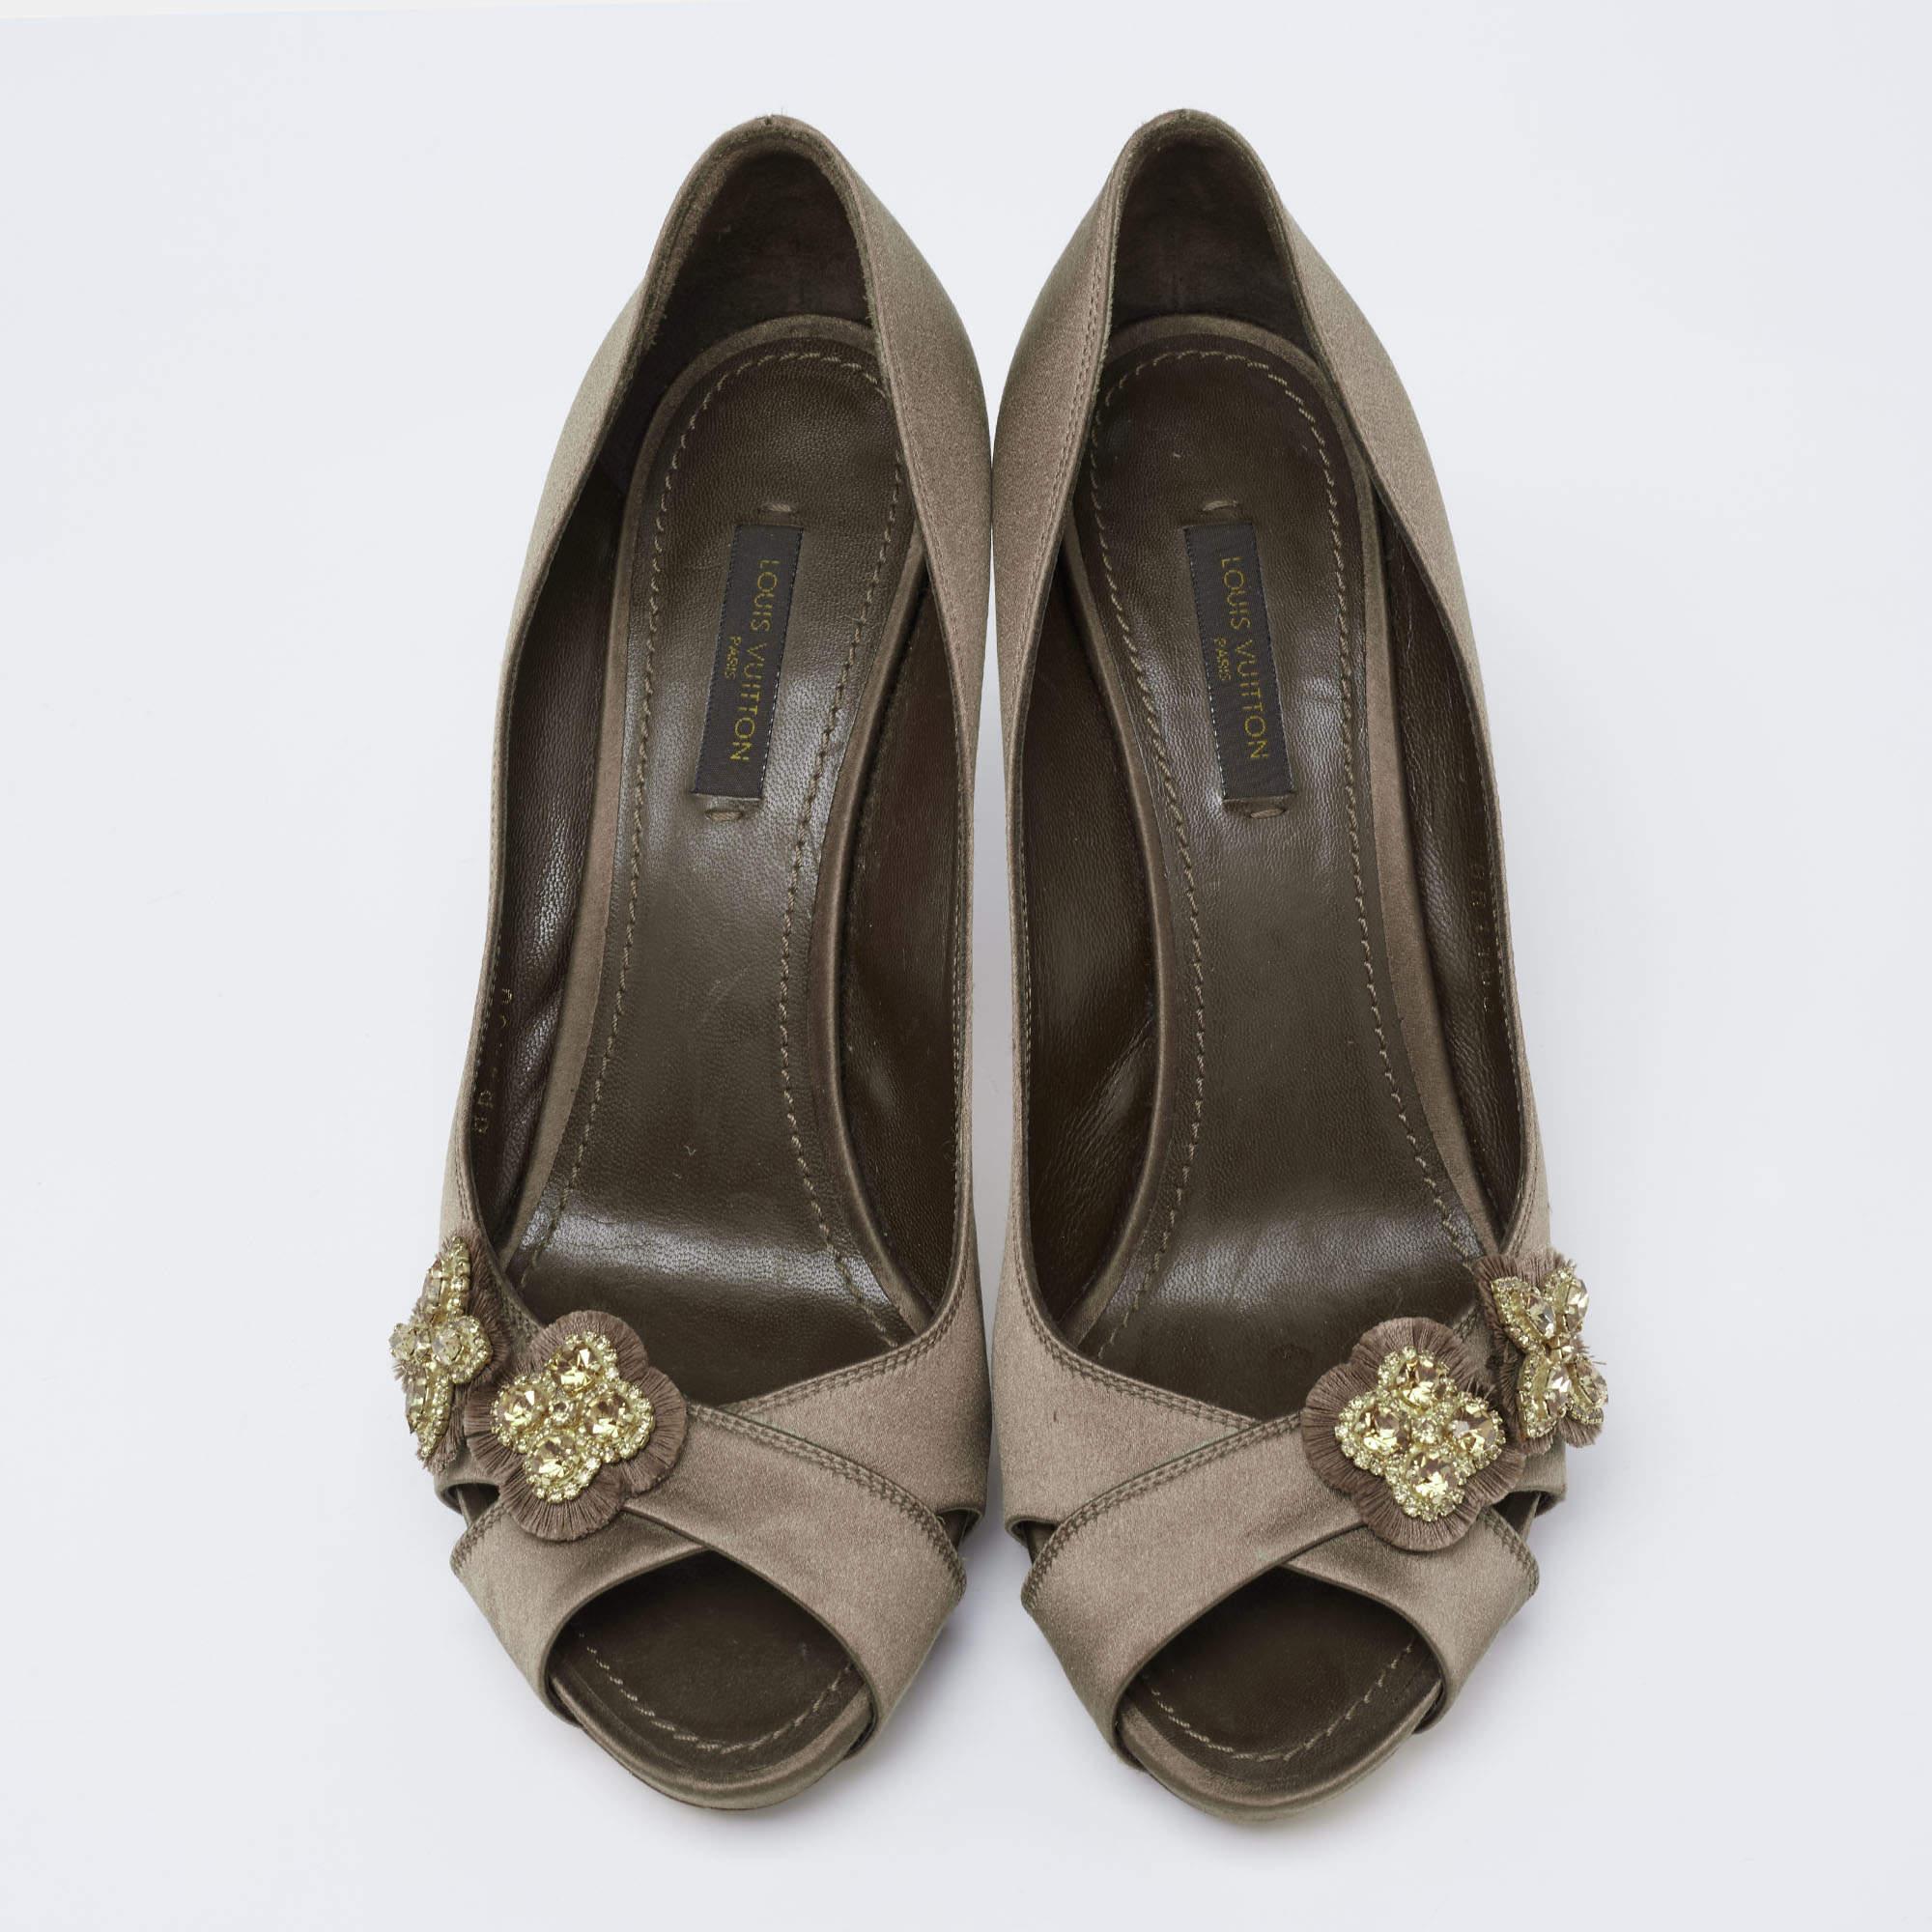 These pumps from Louis Vuitton will certainly make you appear classy and polished! They are created using dark olive-green satin on the exterior. They showcase super-slim heels, crystal embellishments on the peep toes, and a slip-on style. Look